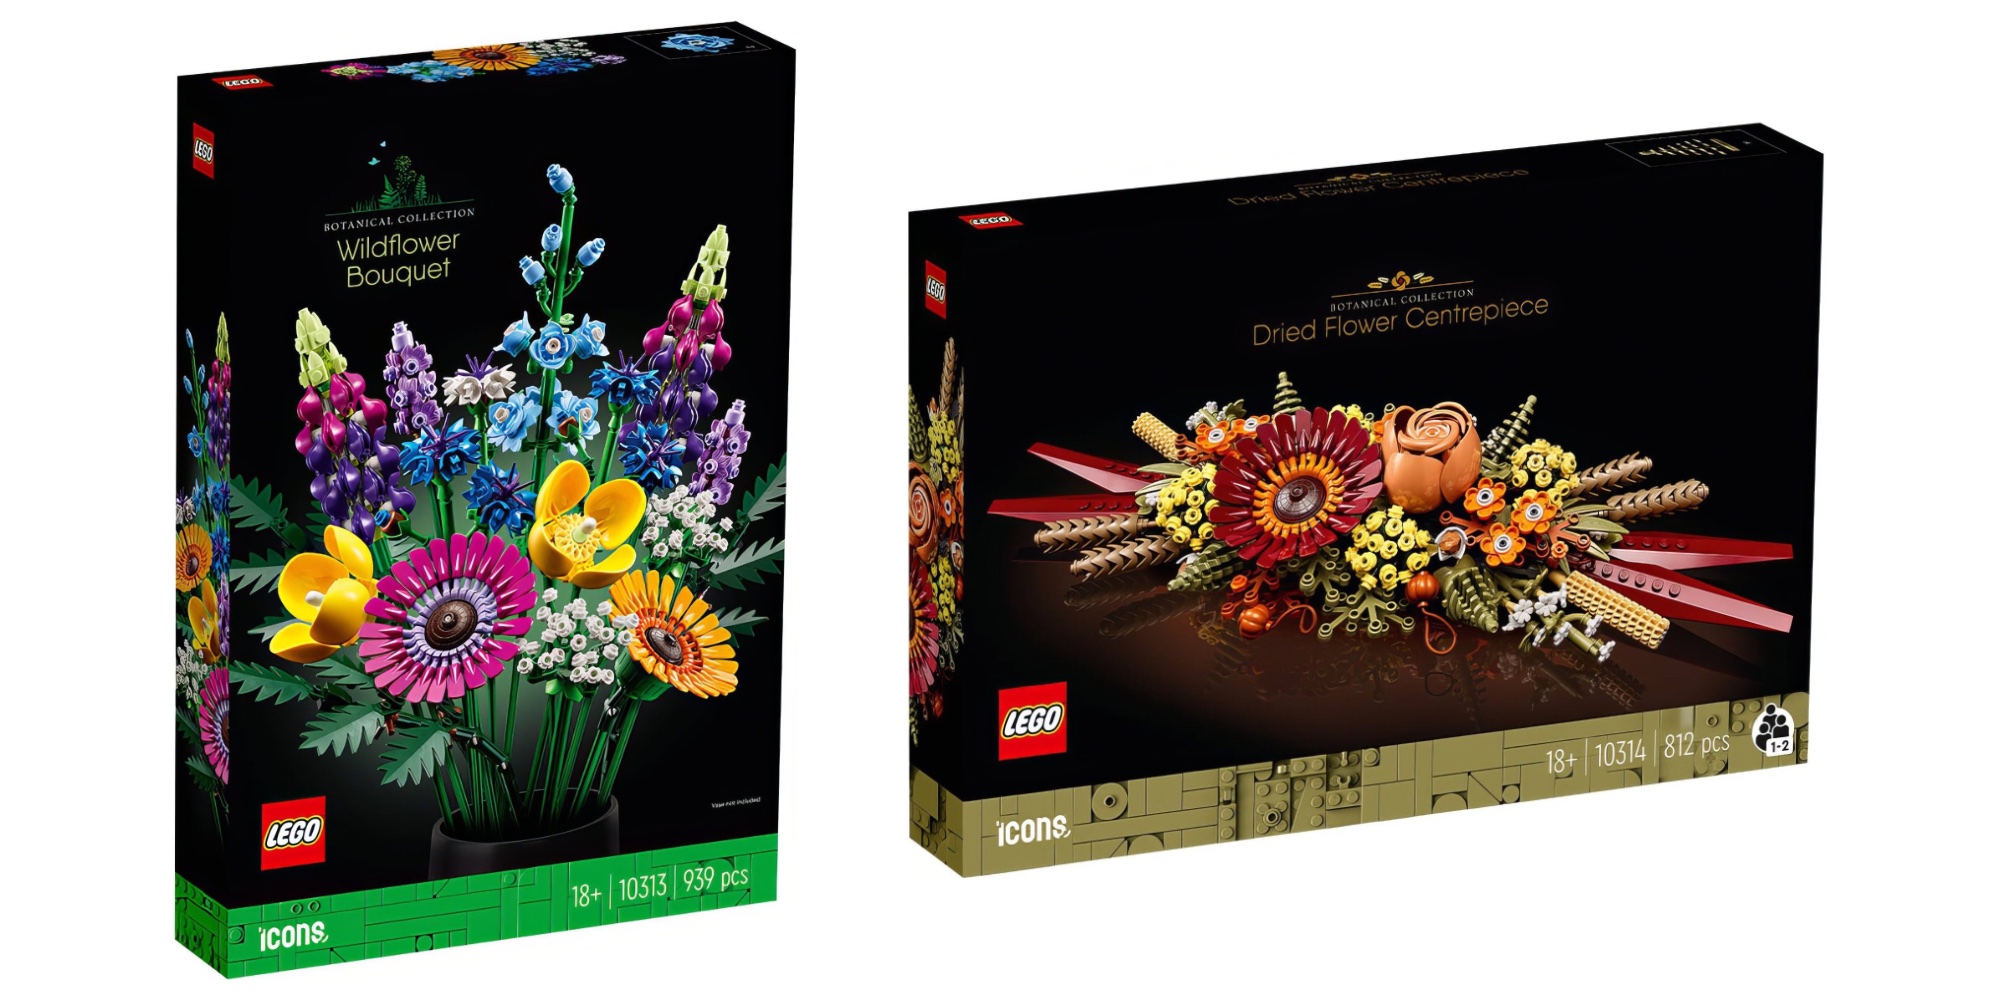 LEGO Botanical Collection sets expand with two new models